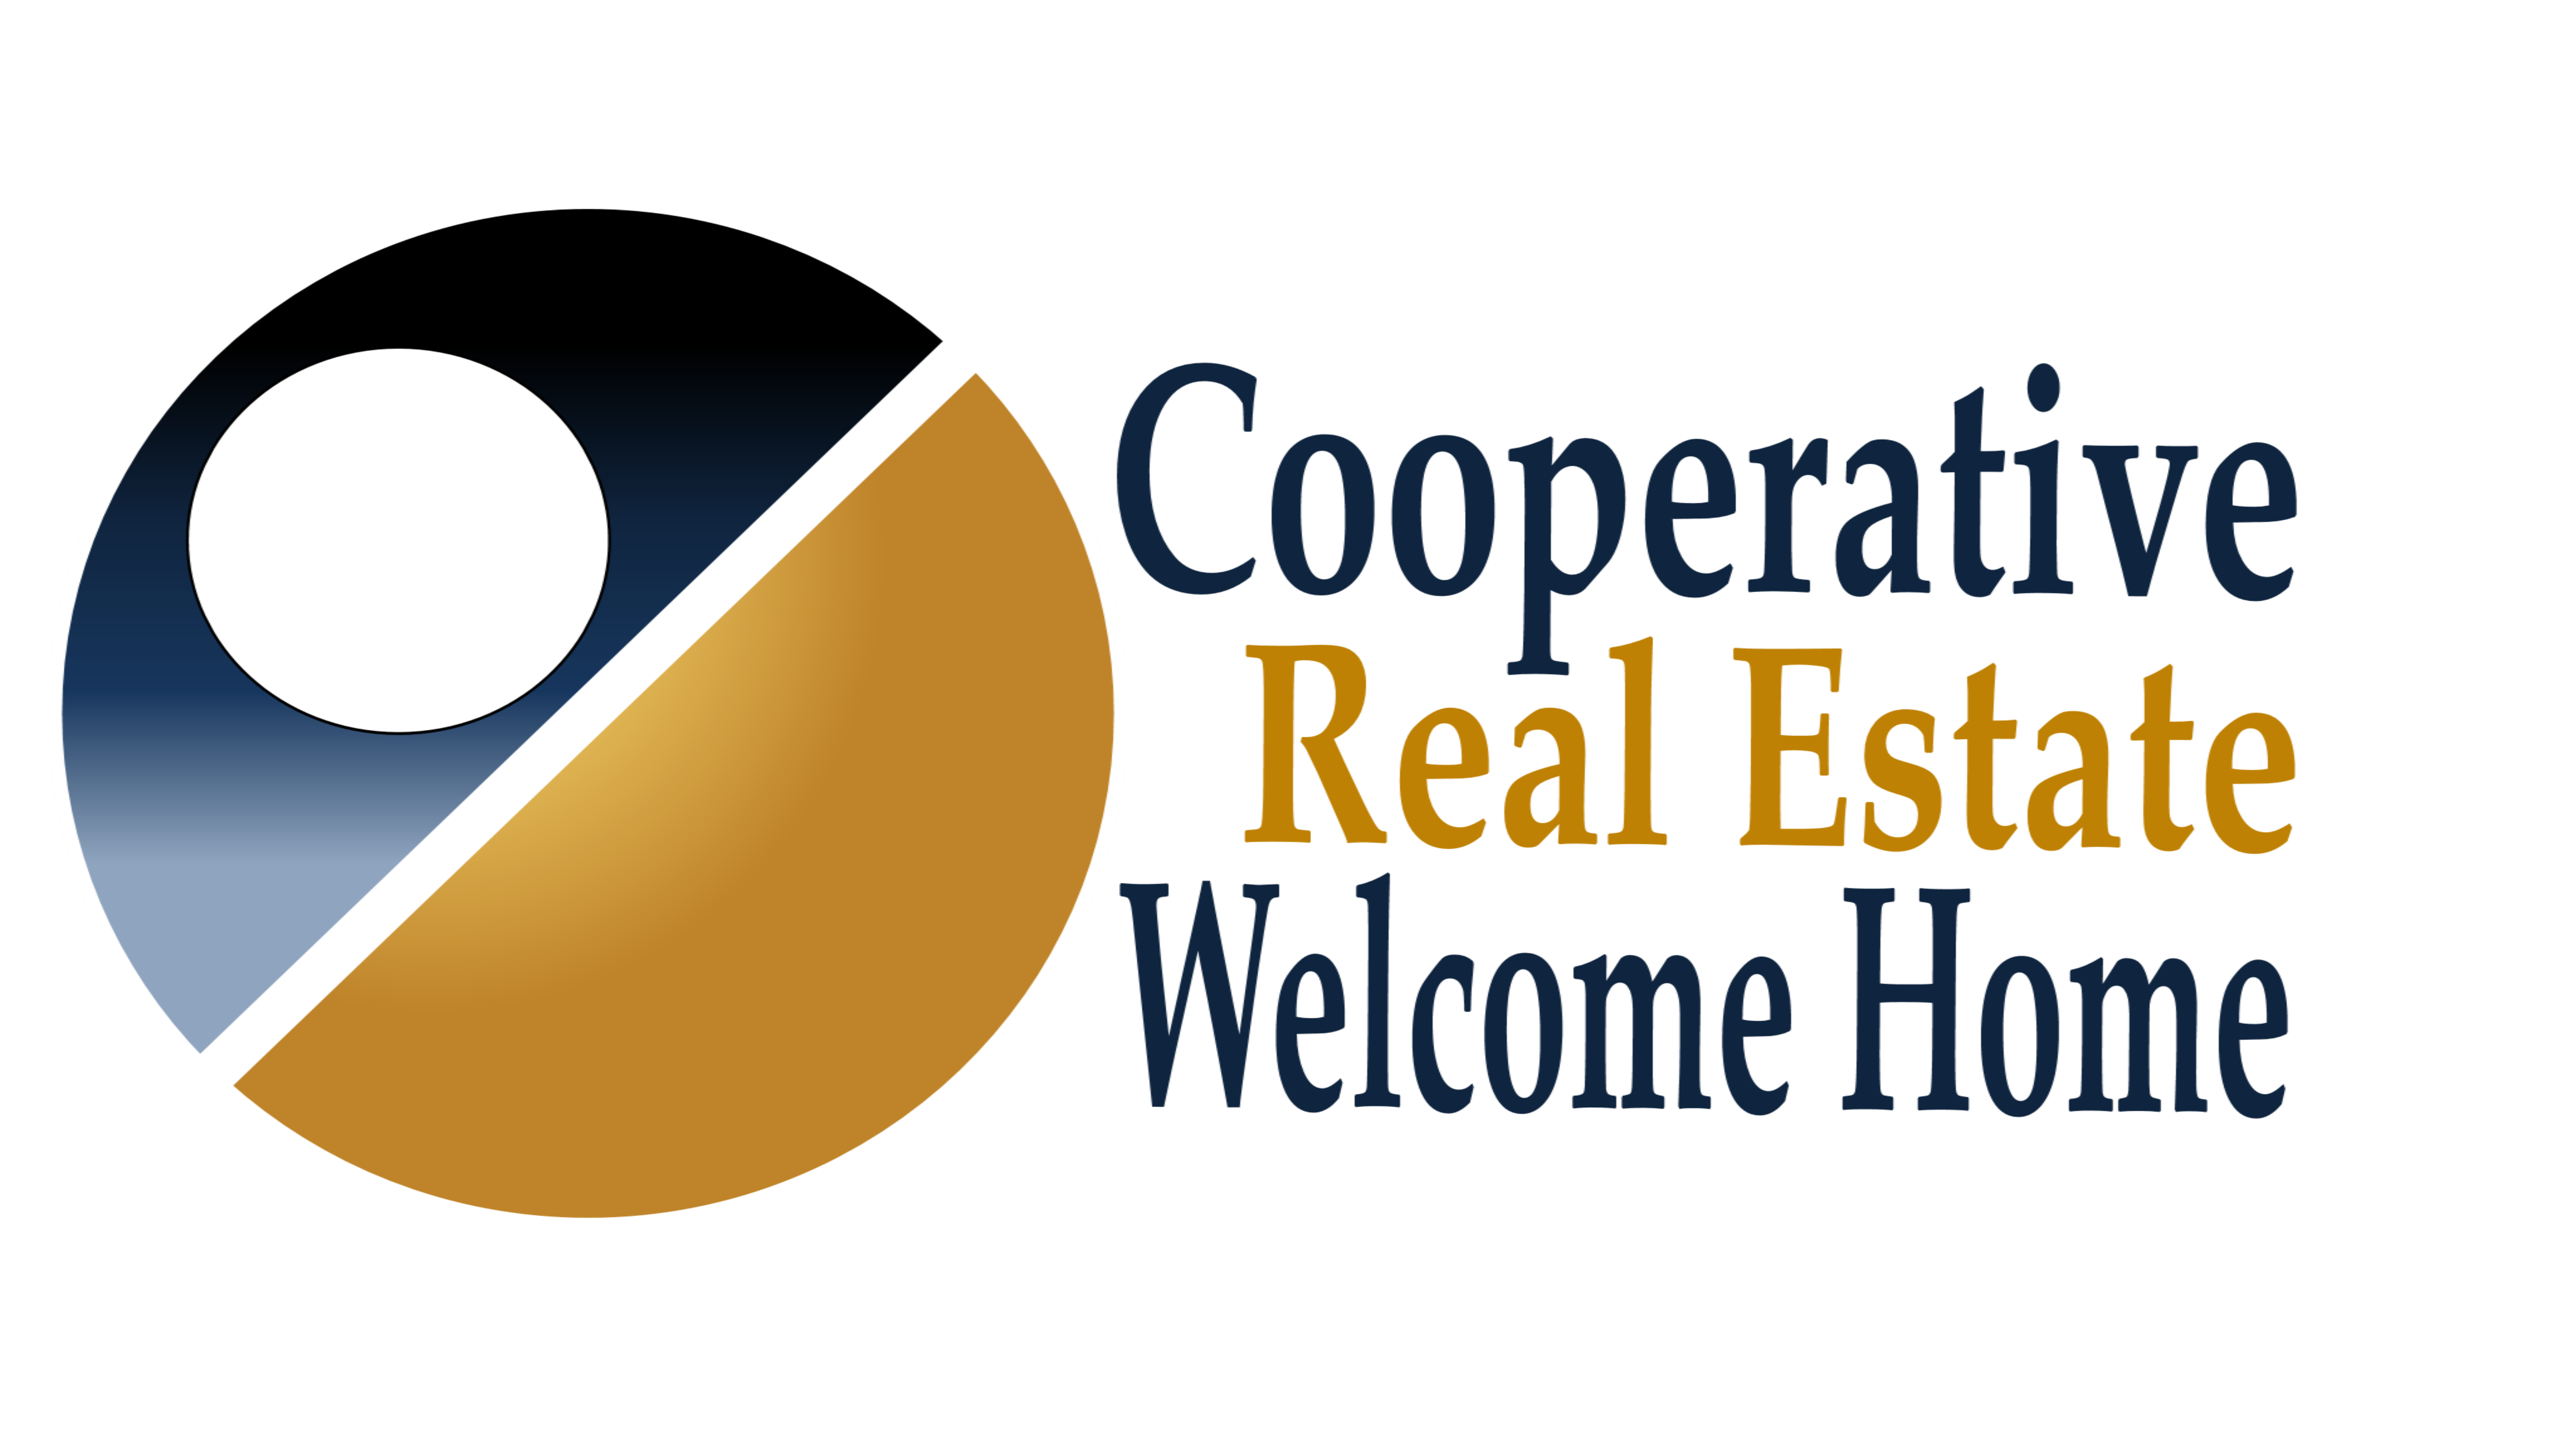 Cooperative Real Estate Welcome Home logo